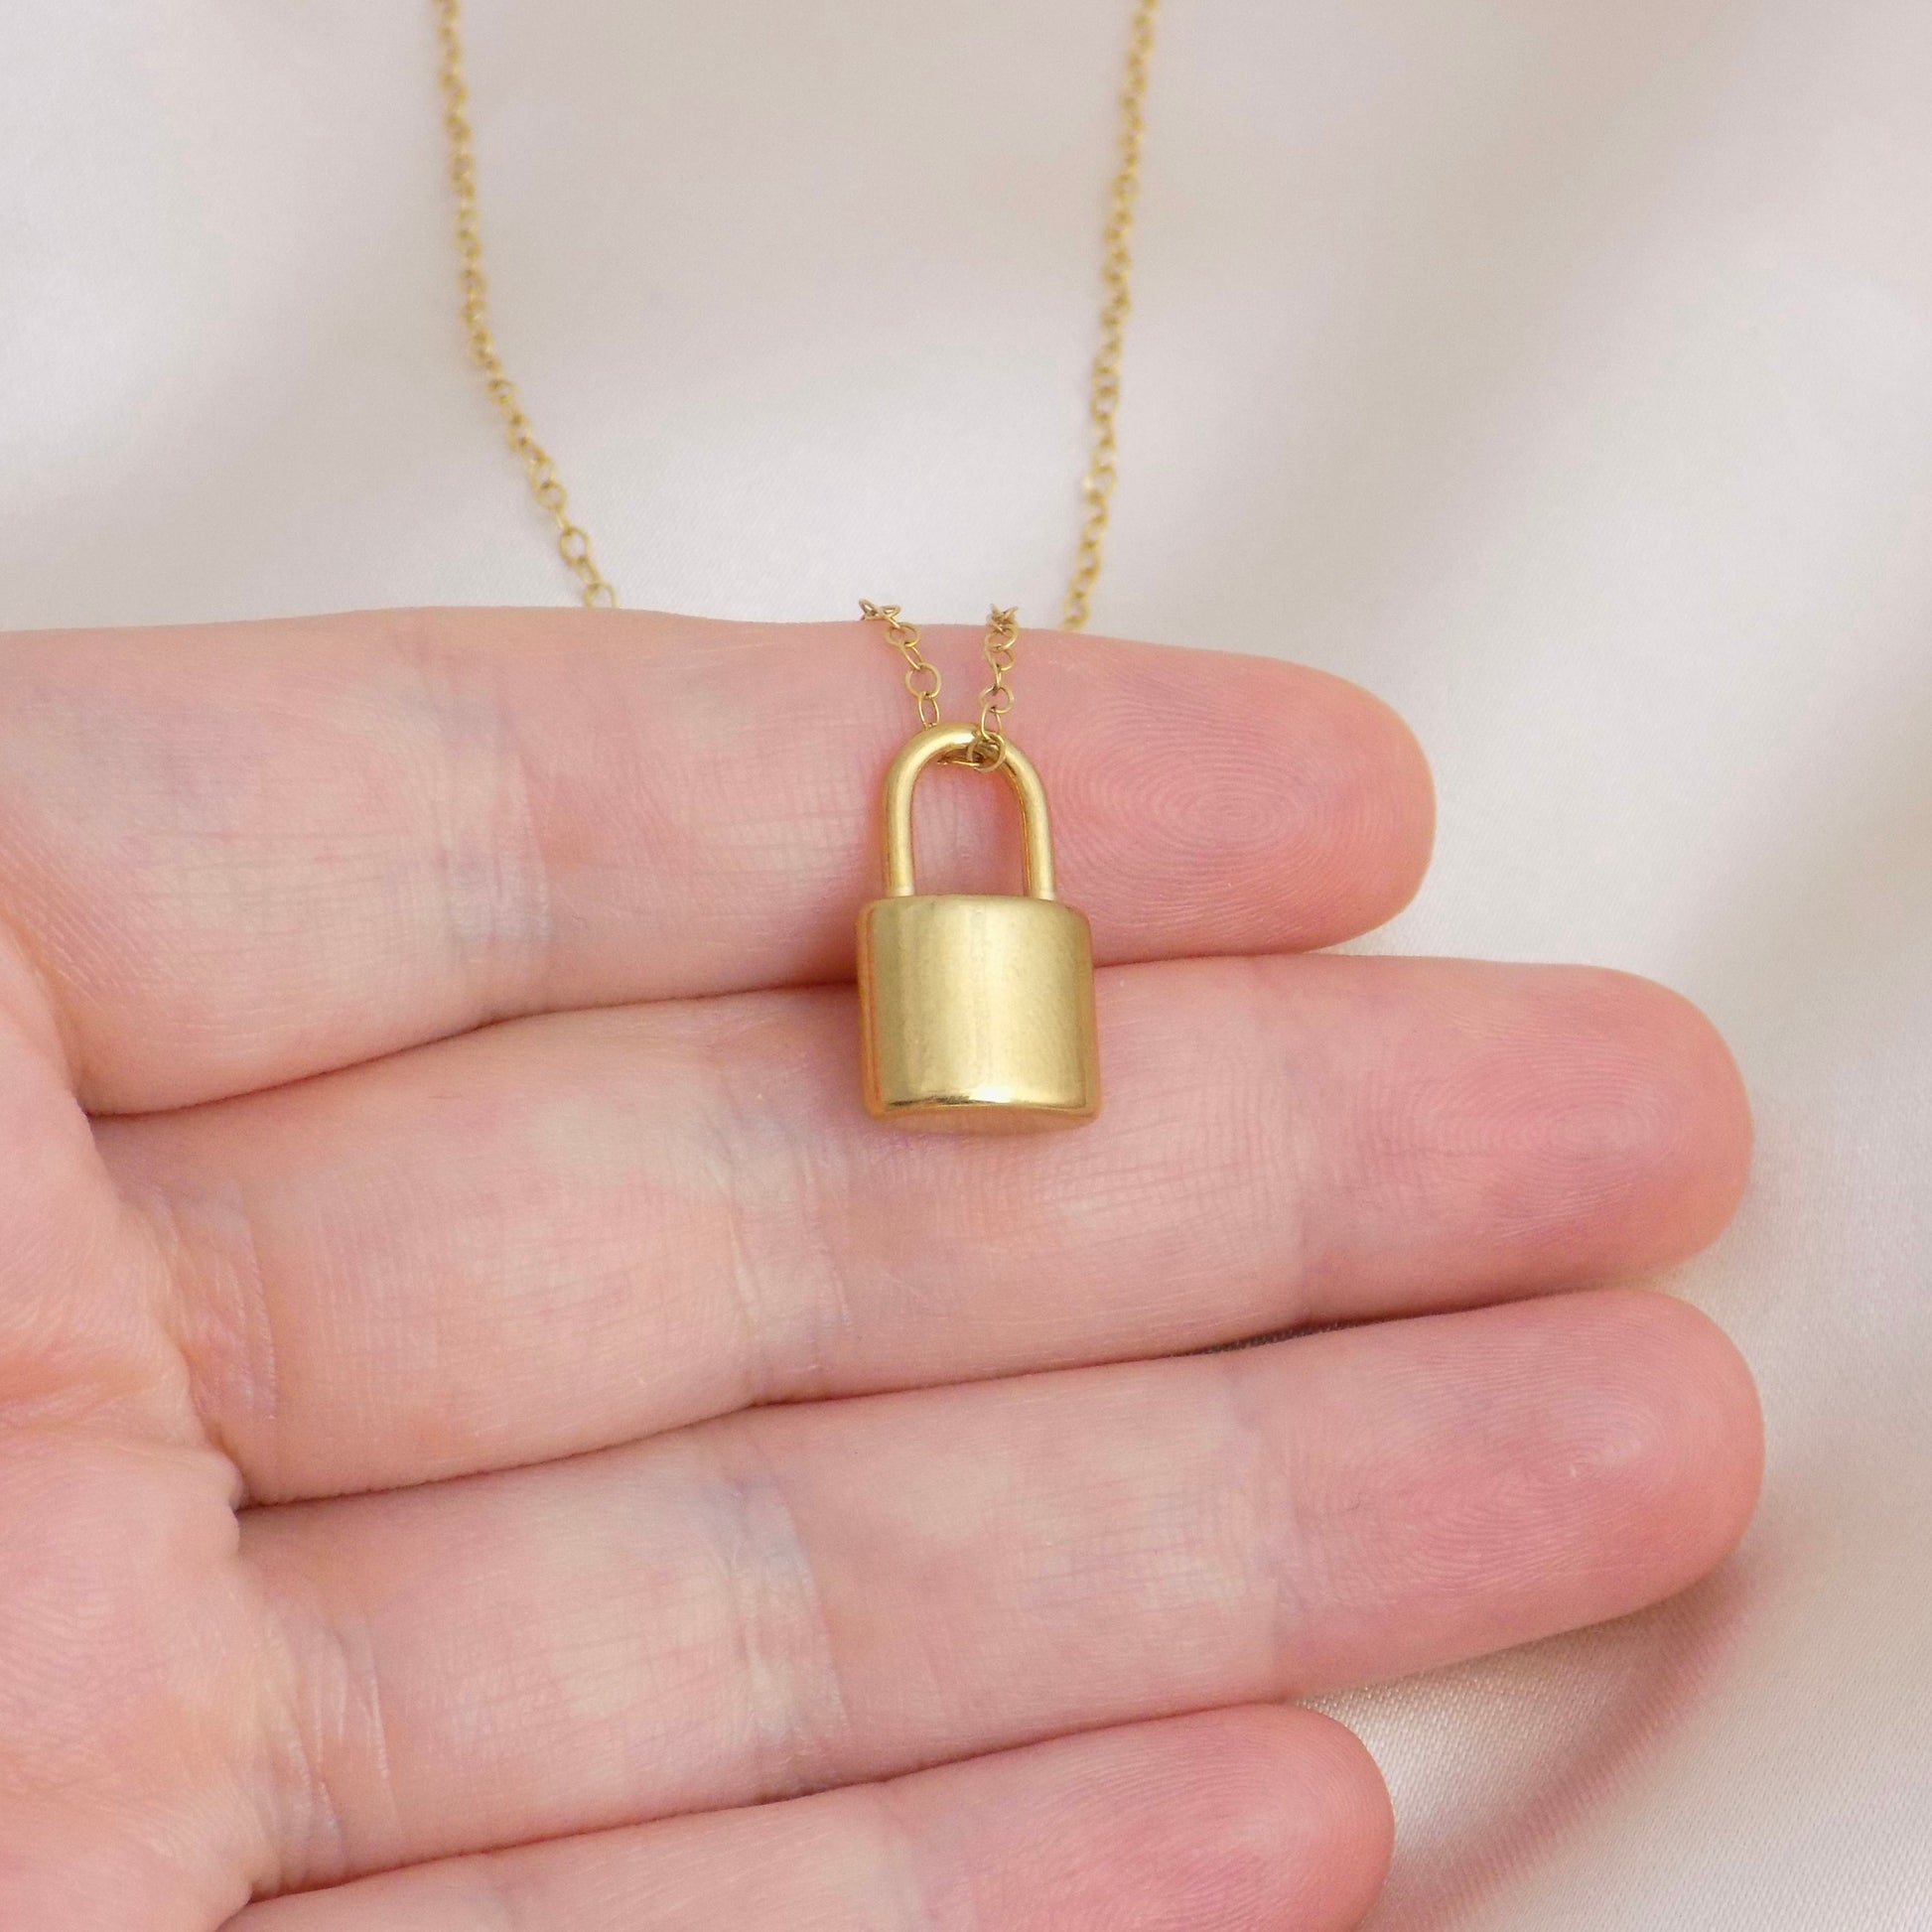 18K Gold Lock Necklace, Lock Charm Necklace For Layering, Trendy Modern Layers, Christmas Gifts For Her, M6-134